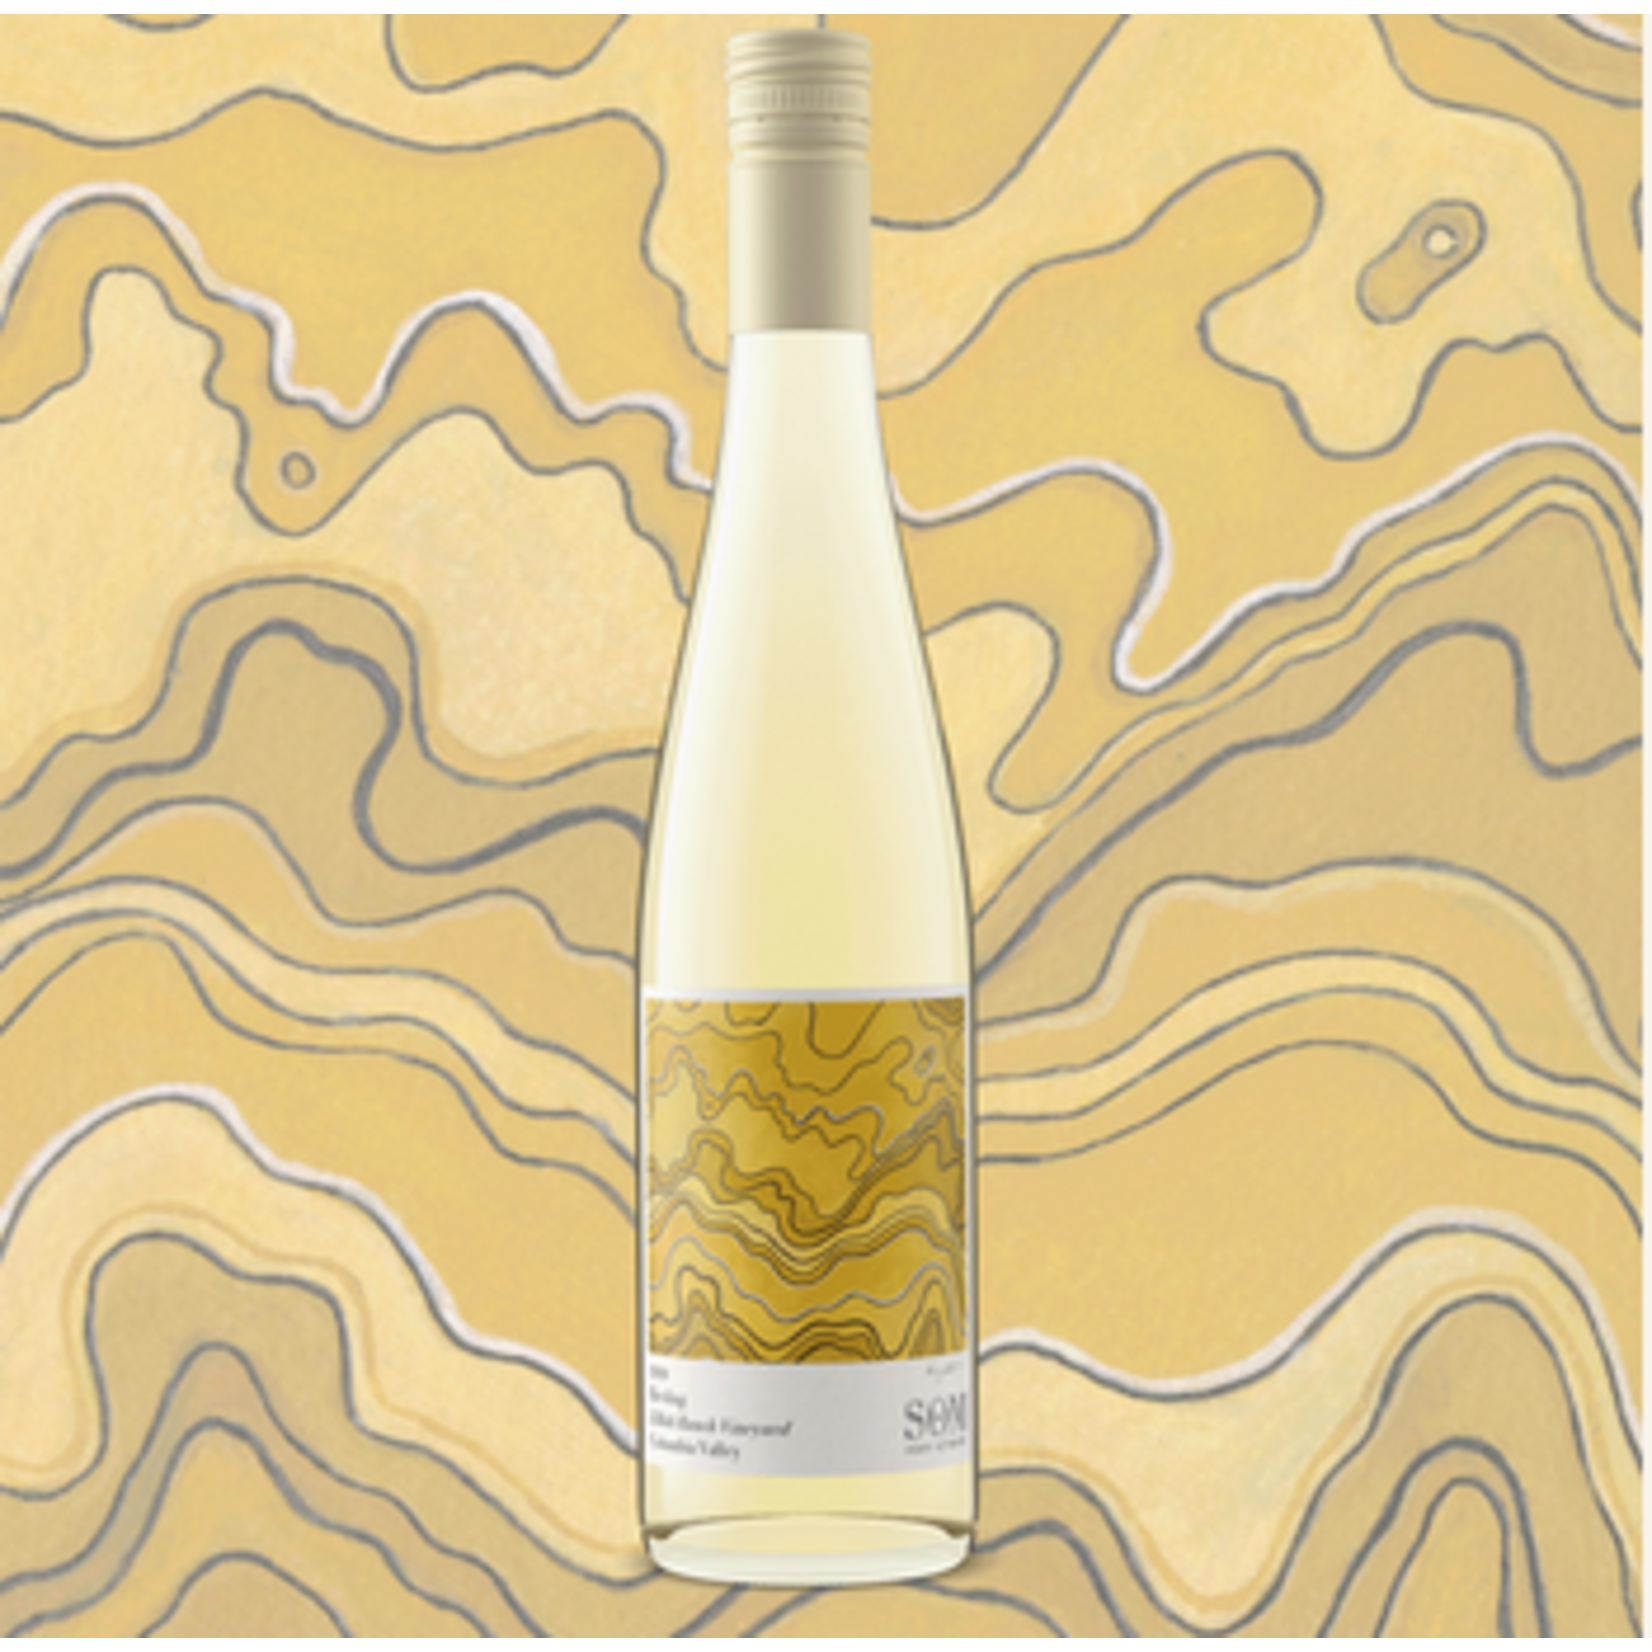 SOM ( State Of Mind) Dry Riesling 2022 "Zillah Ranch Vineyard"  Columbia Valley,  Washington